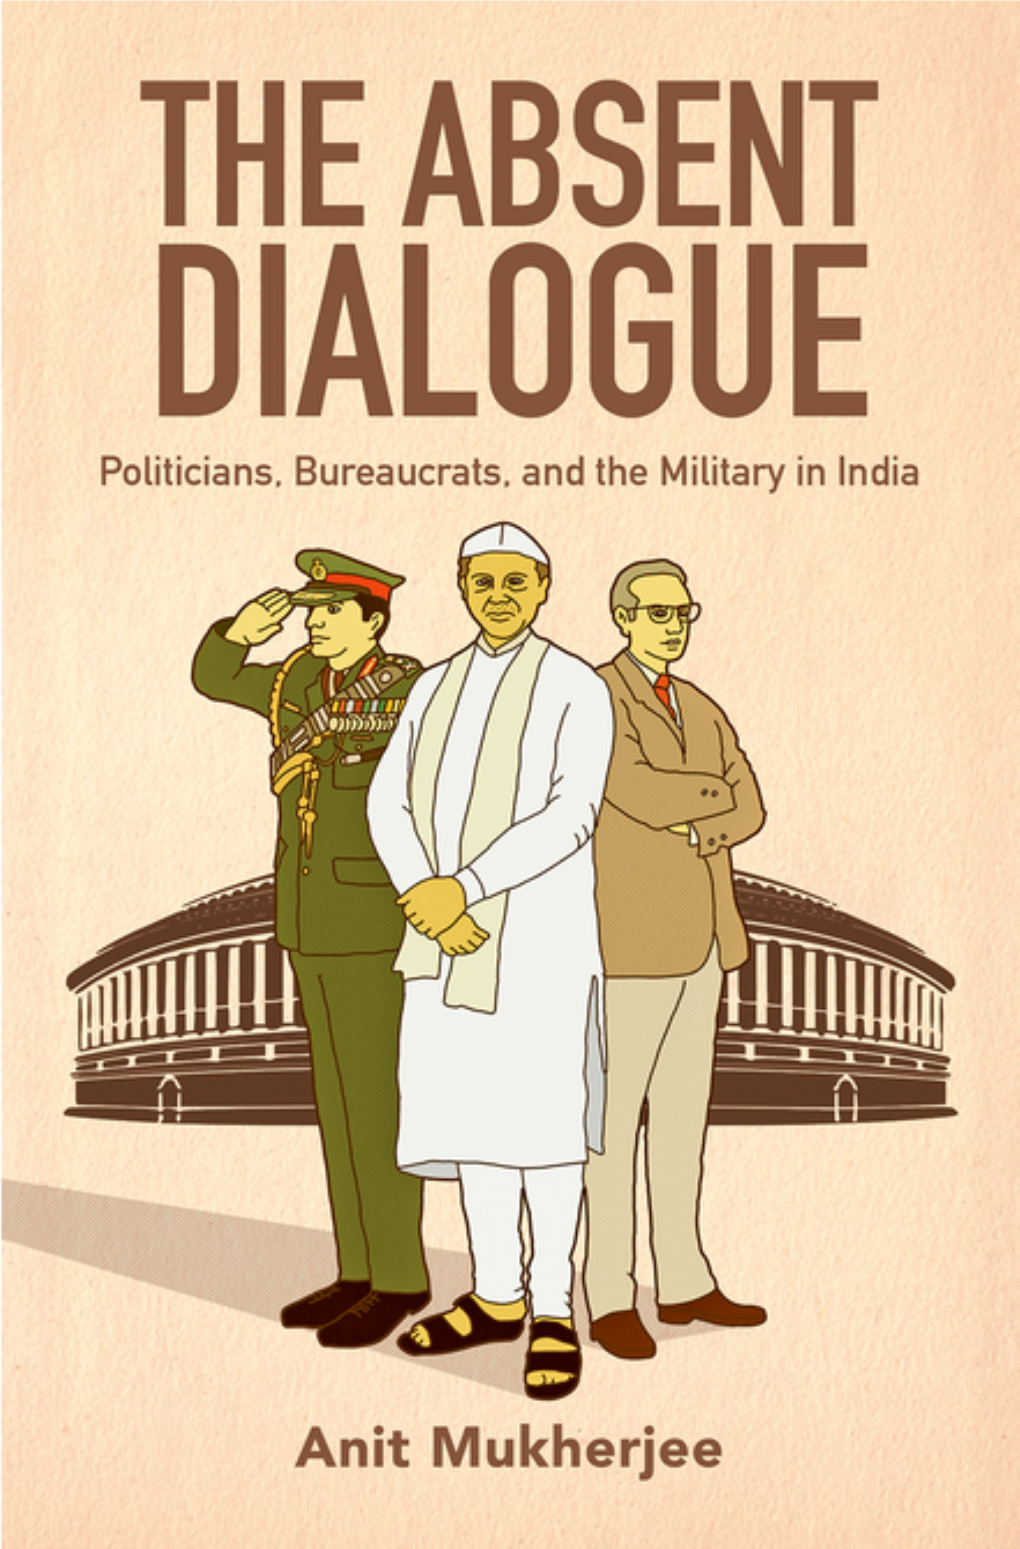 Politicians, Bureaucrats, and the Military in India